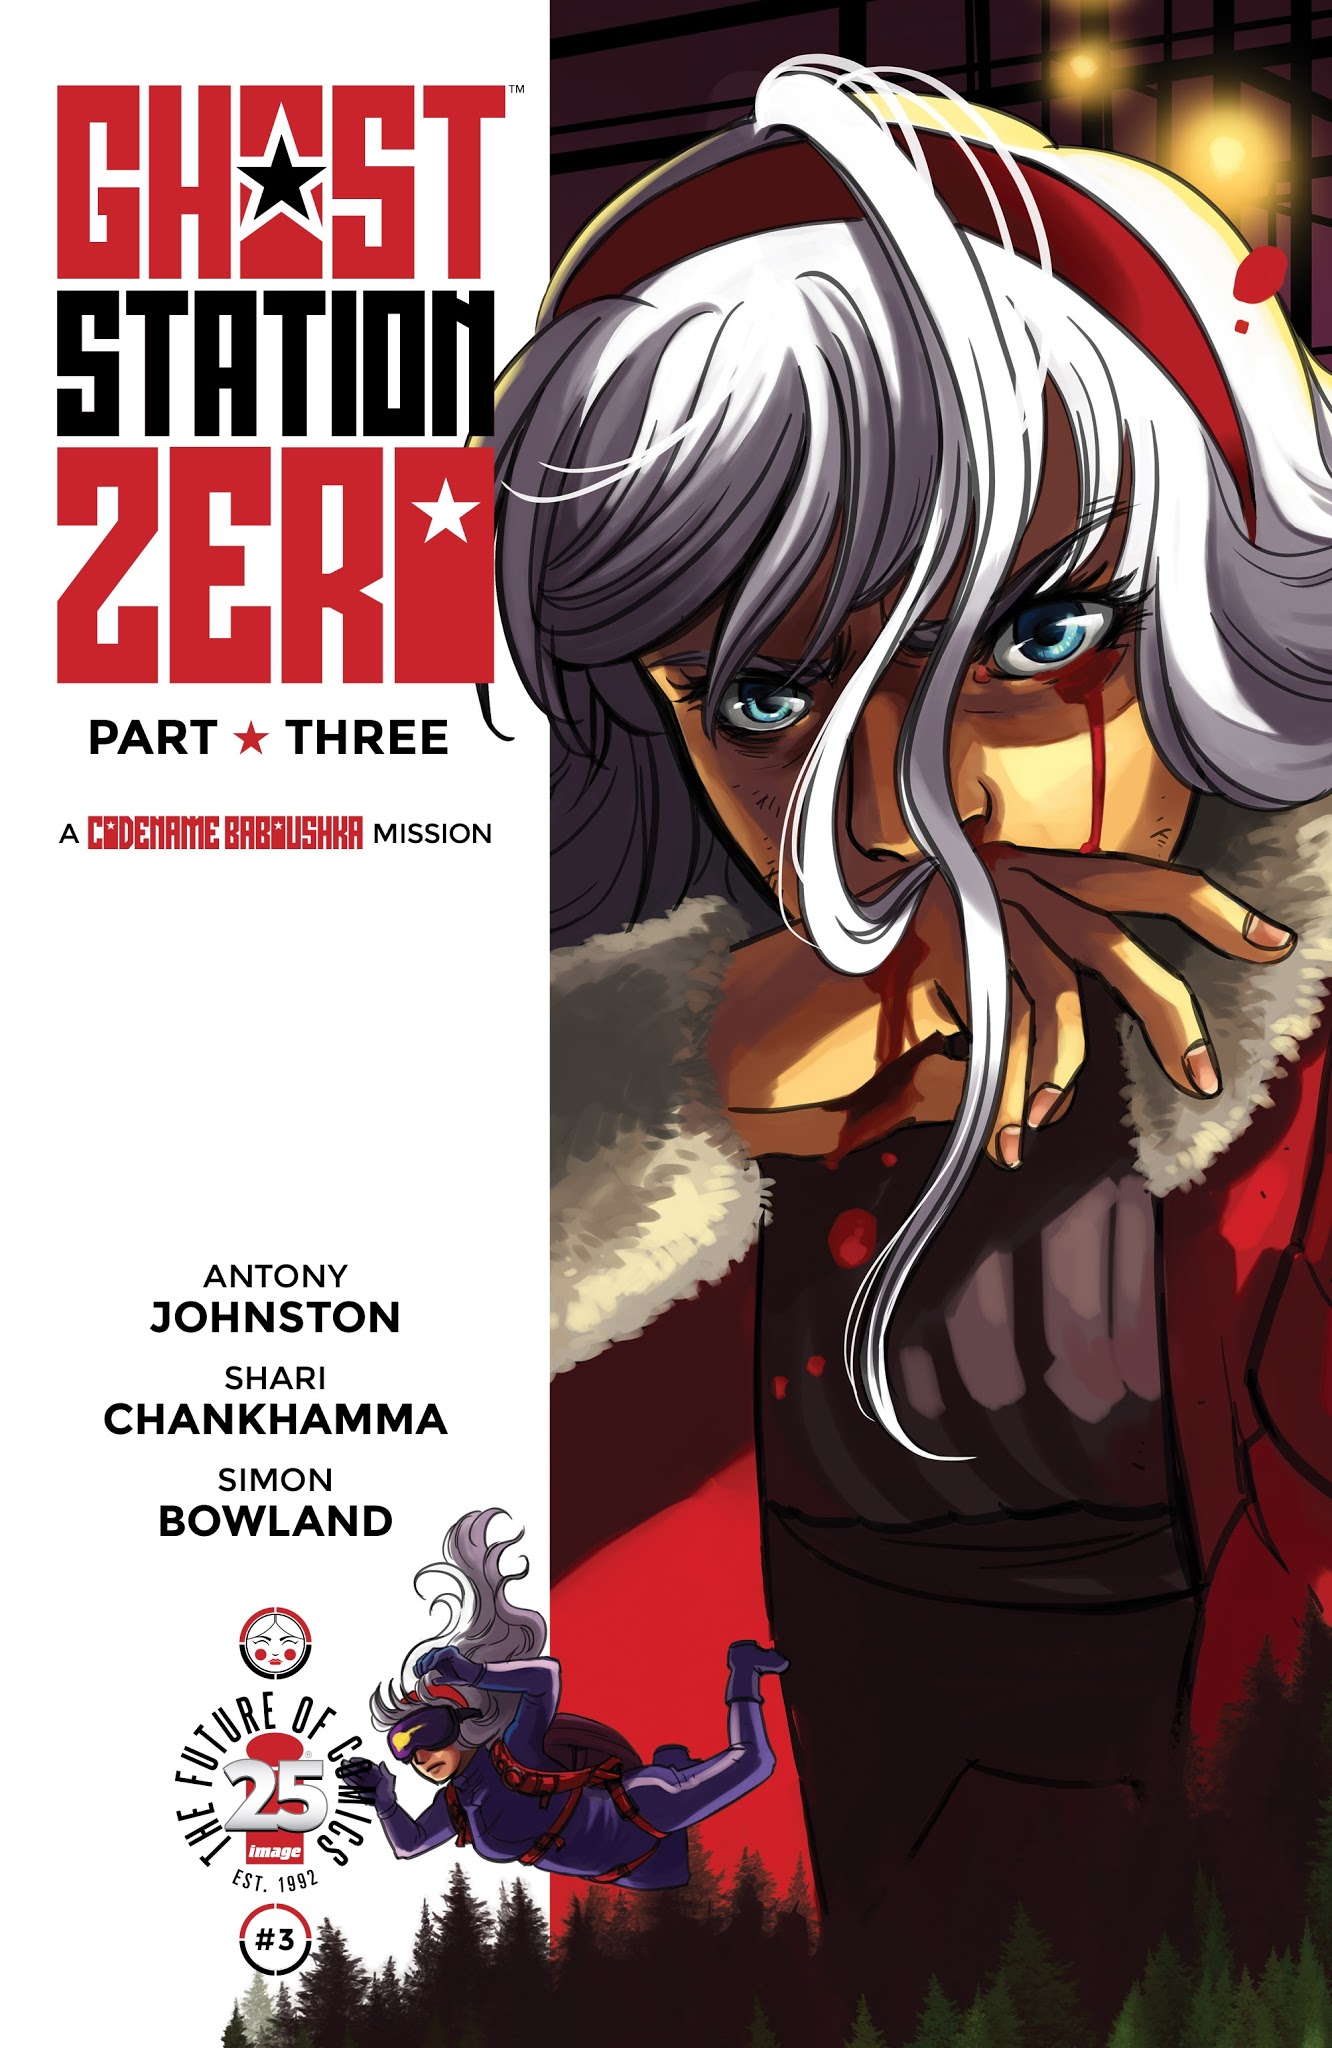 Read online Ghost Station Zero comic -  Issue #3 - 1